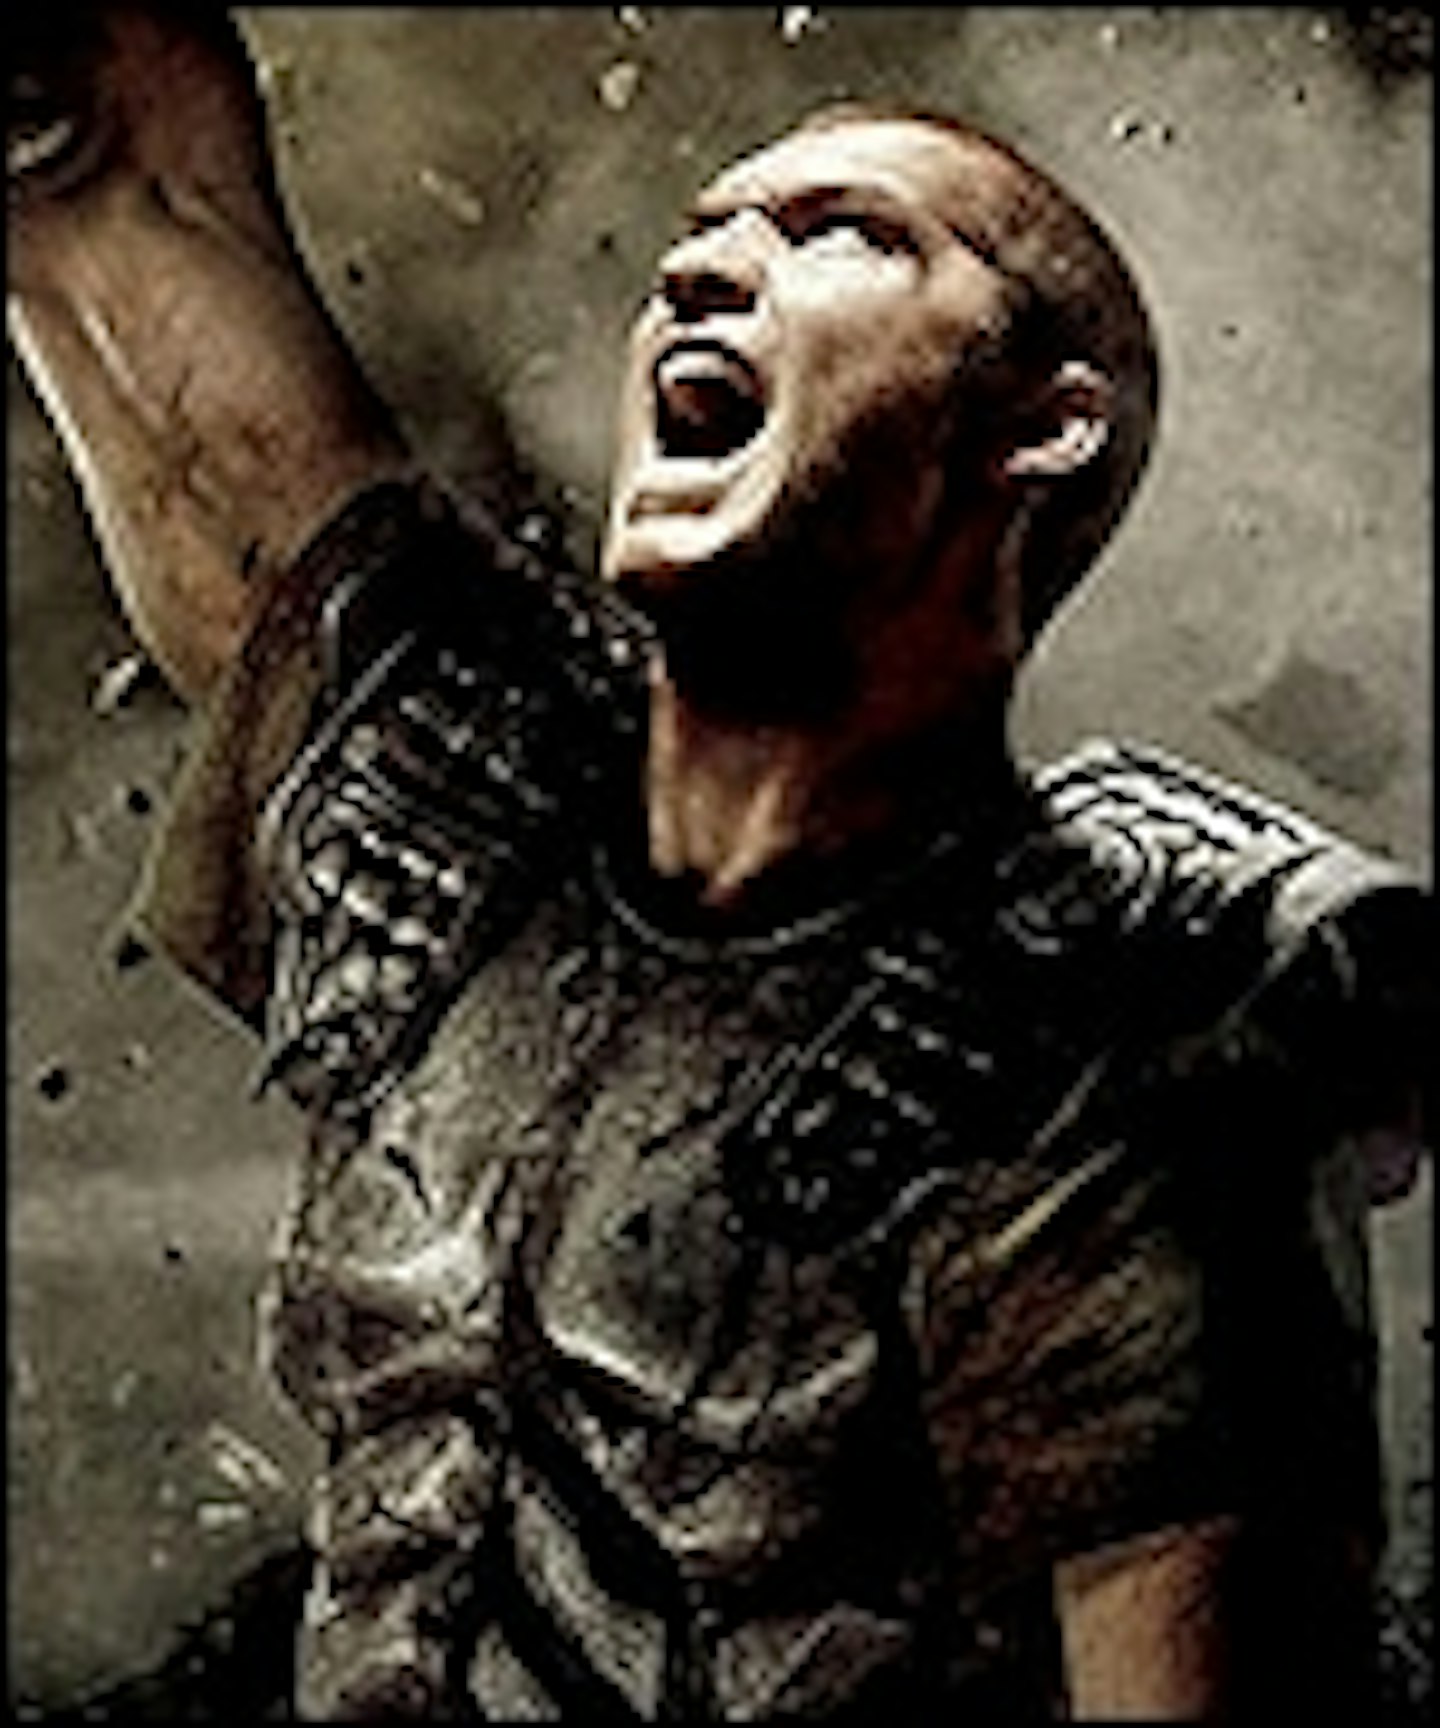 New Clash of the Titans Posters Online